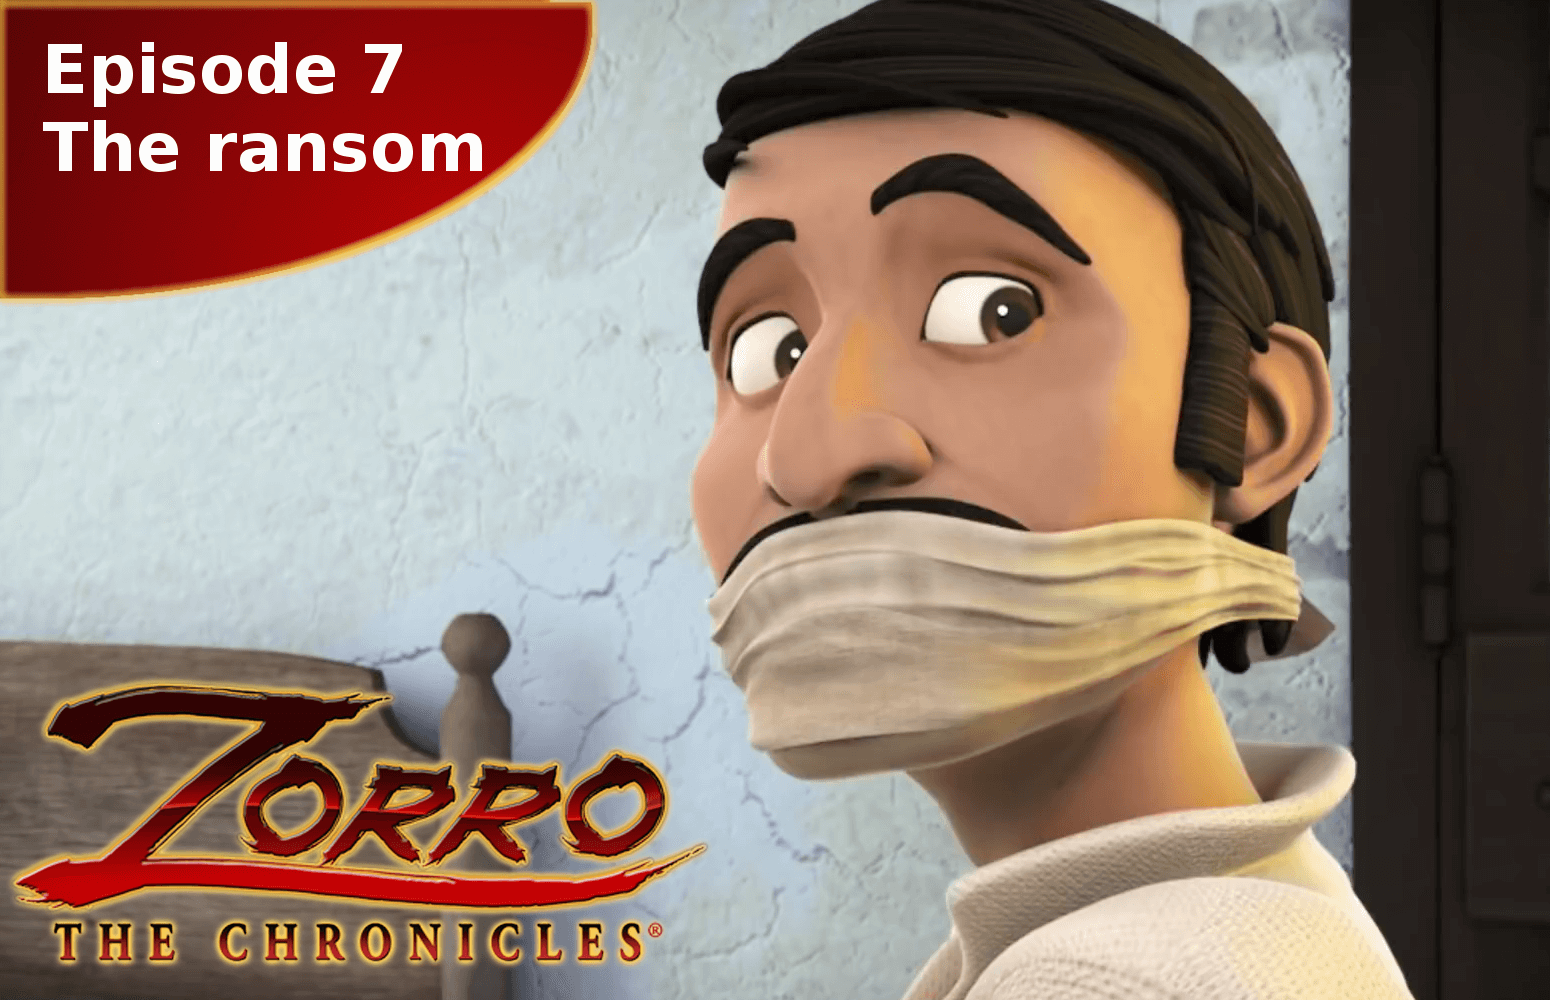 Zorro the Chronicles episode 7 The ransom